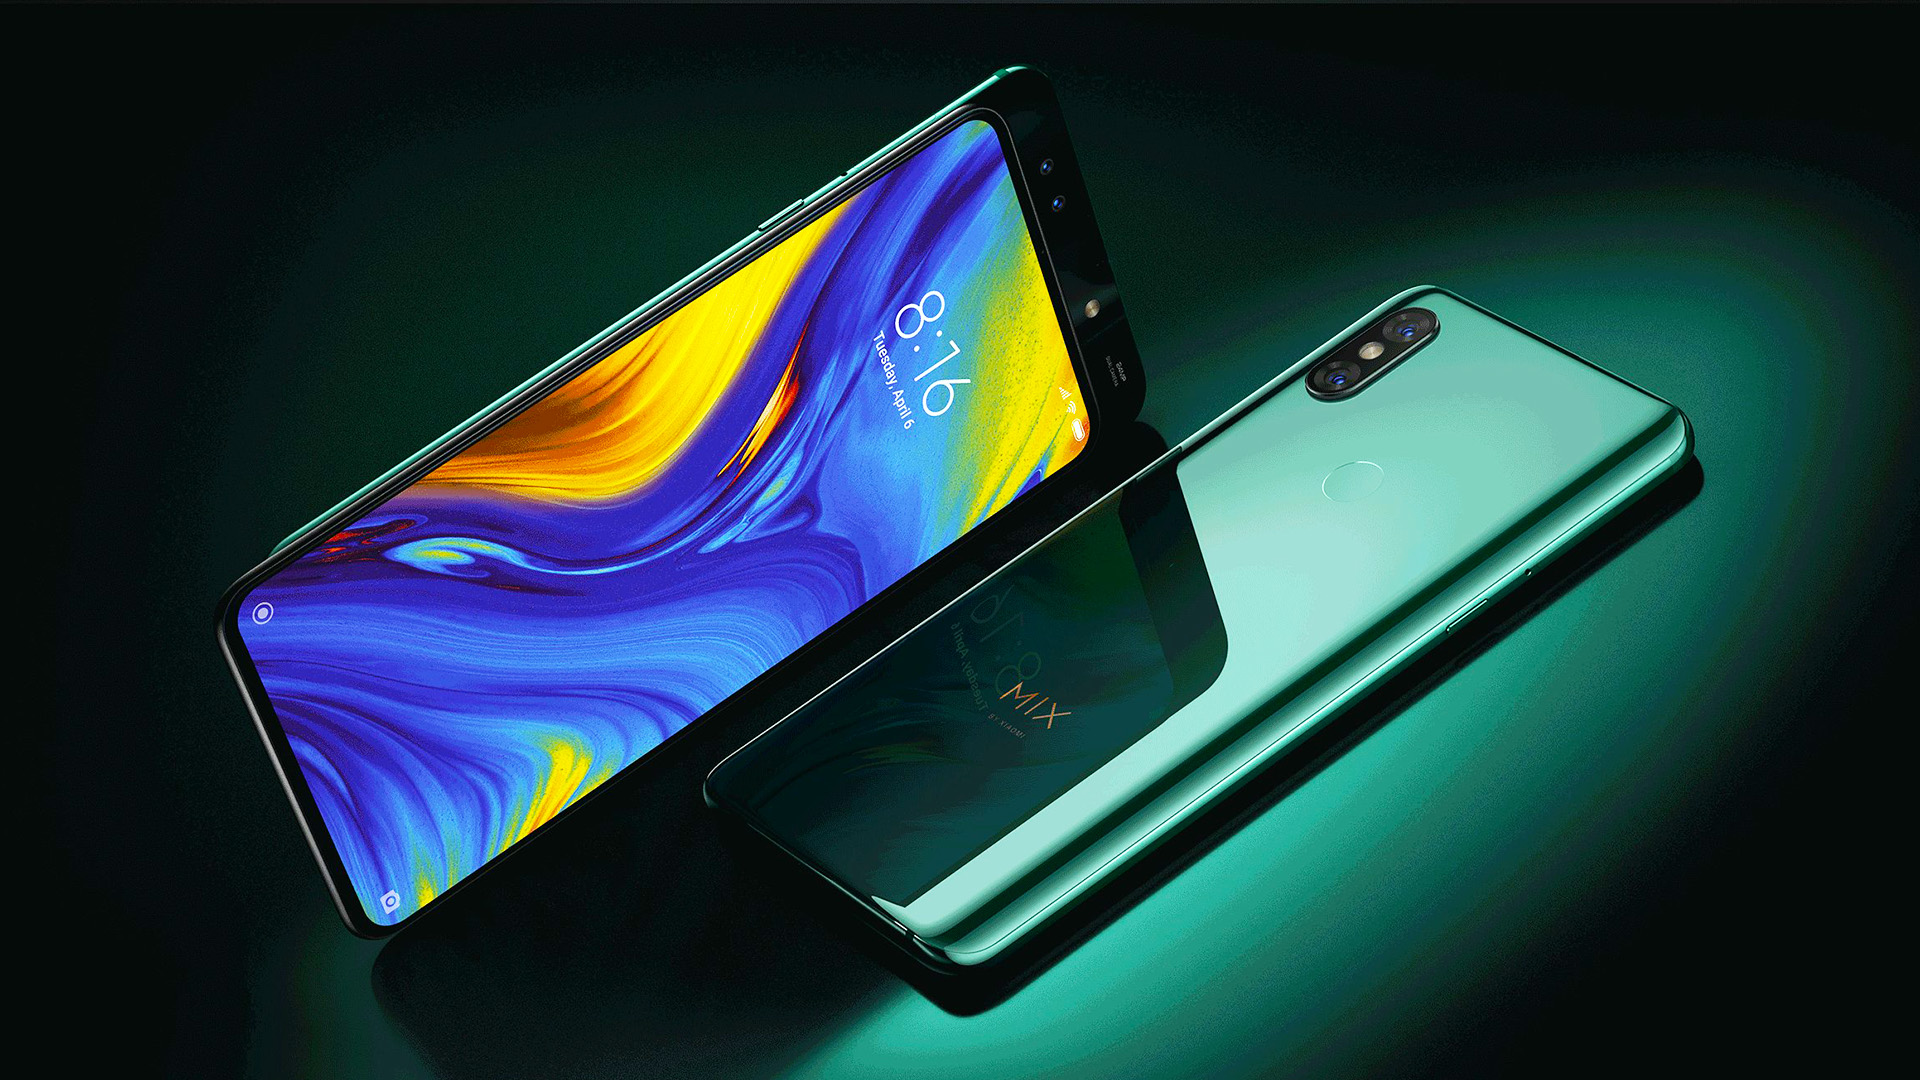 Xiaomi Mi Mix 3 comes with global stable Android 10